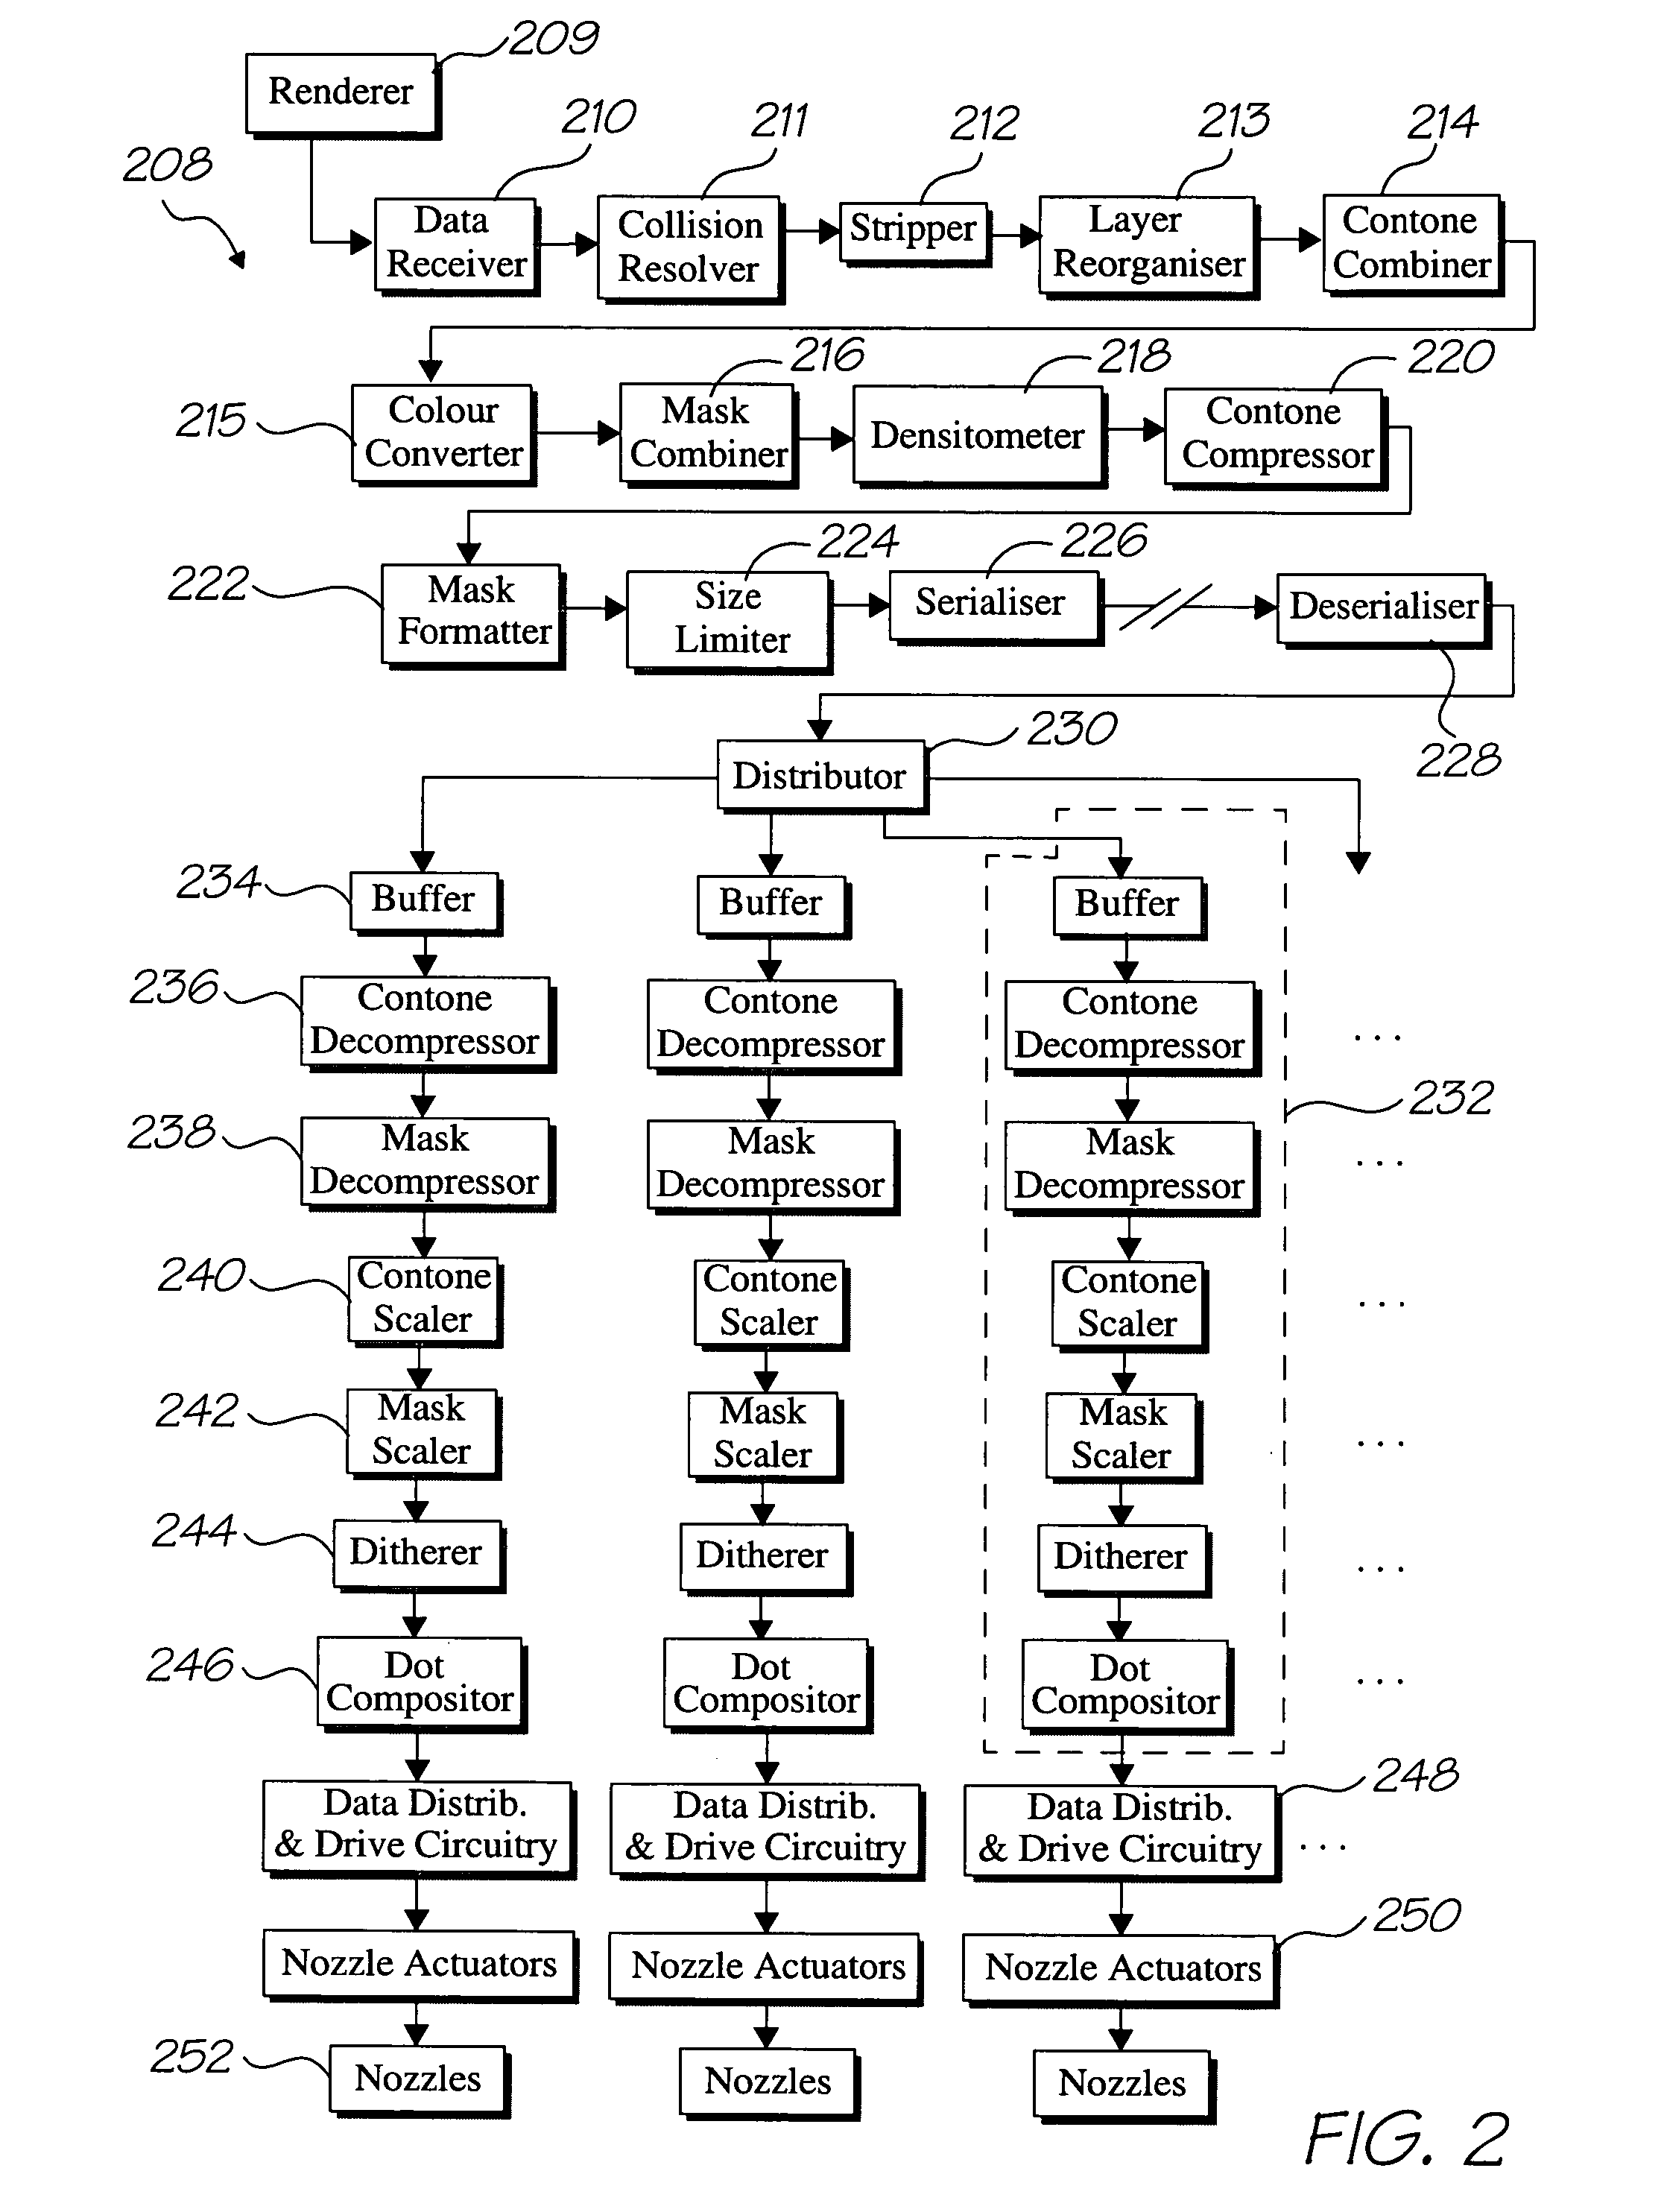 Display device configured such that an edge of print media is visible above an upper edge of the device